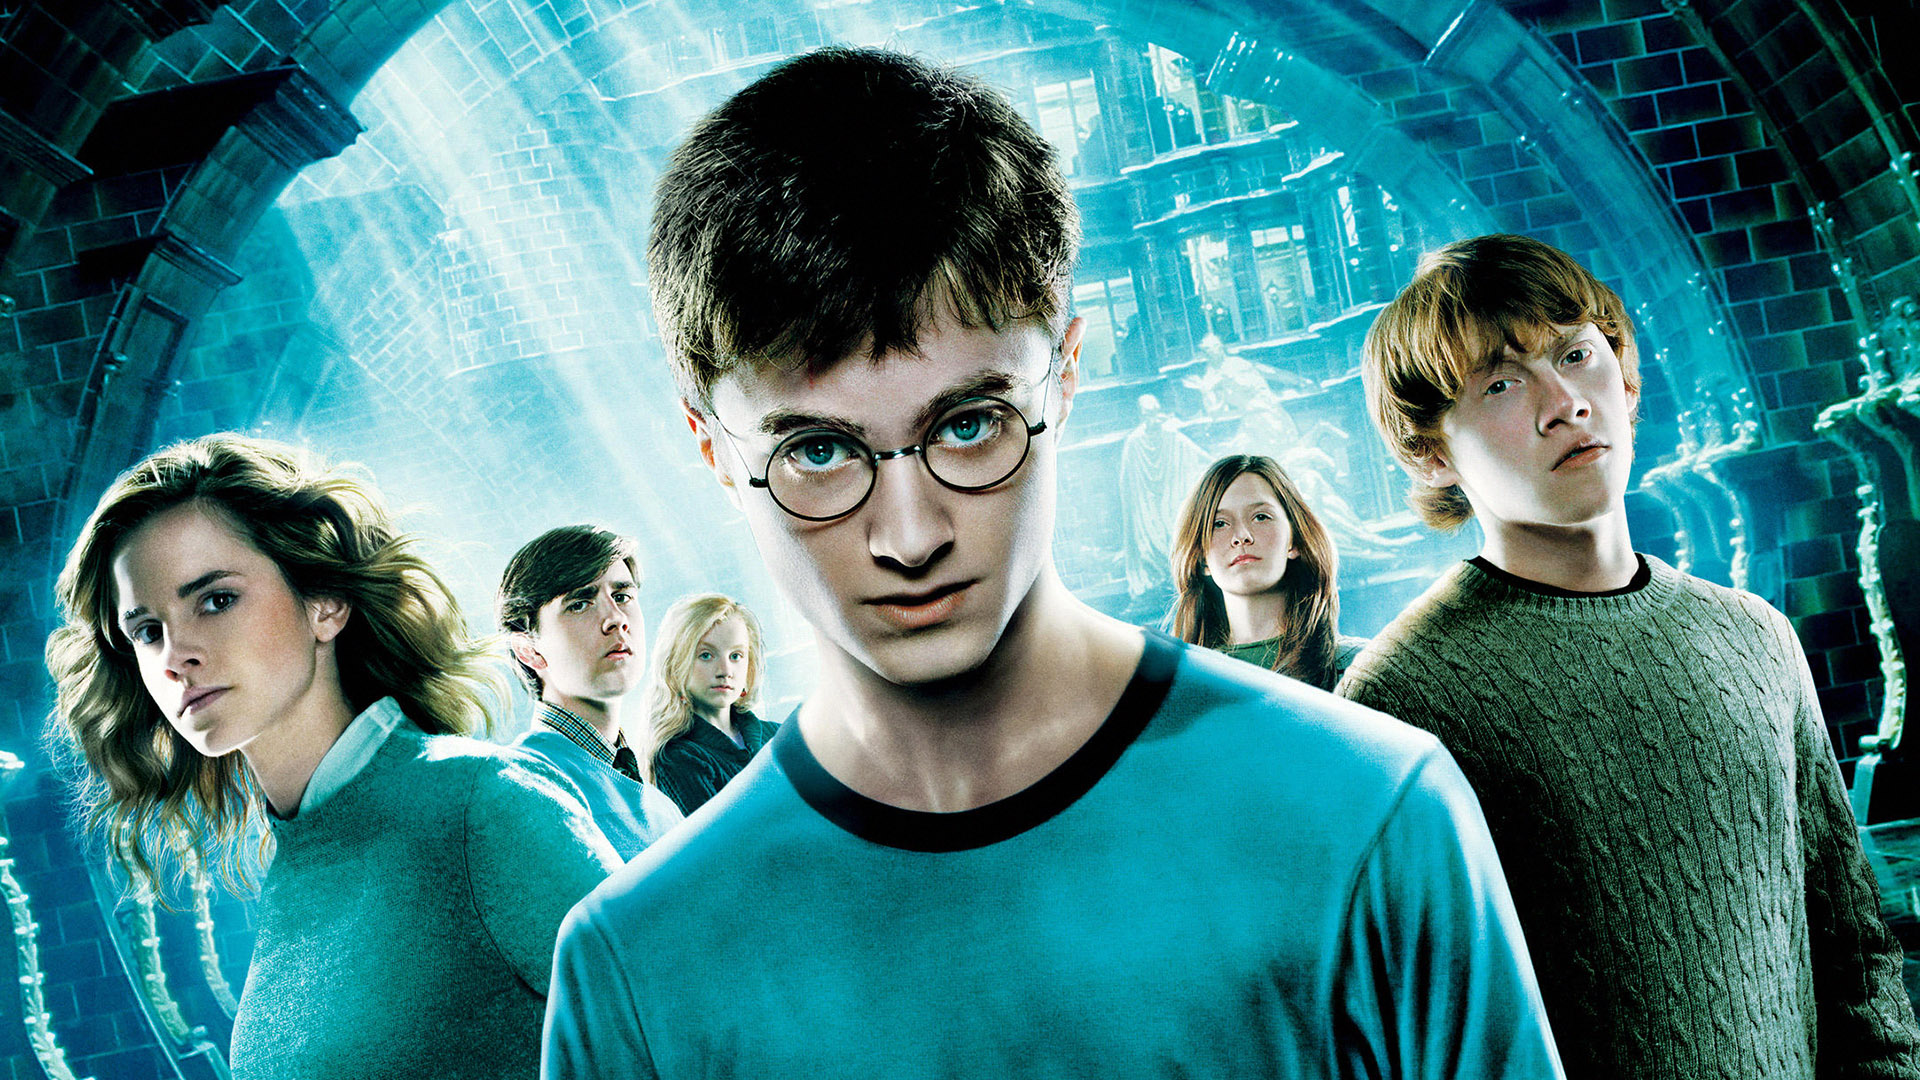 Harry Potter Fans Should Stop Passing These 5 Headcanons as Facts